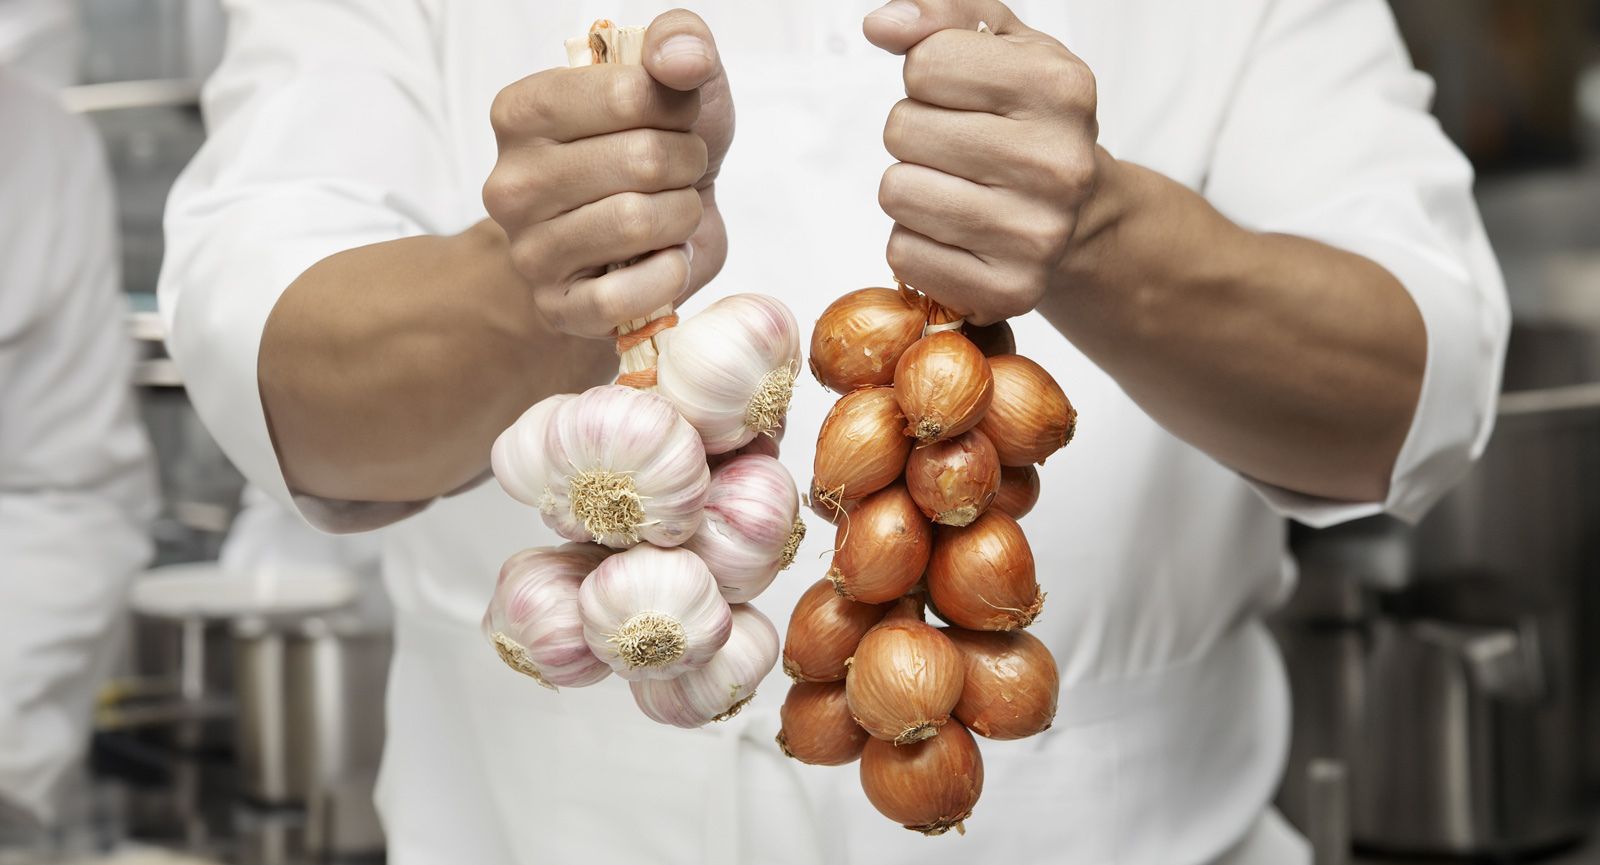 torso of person wearing chef coat holding a bunch of garlic and a bunch of onions